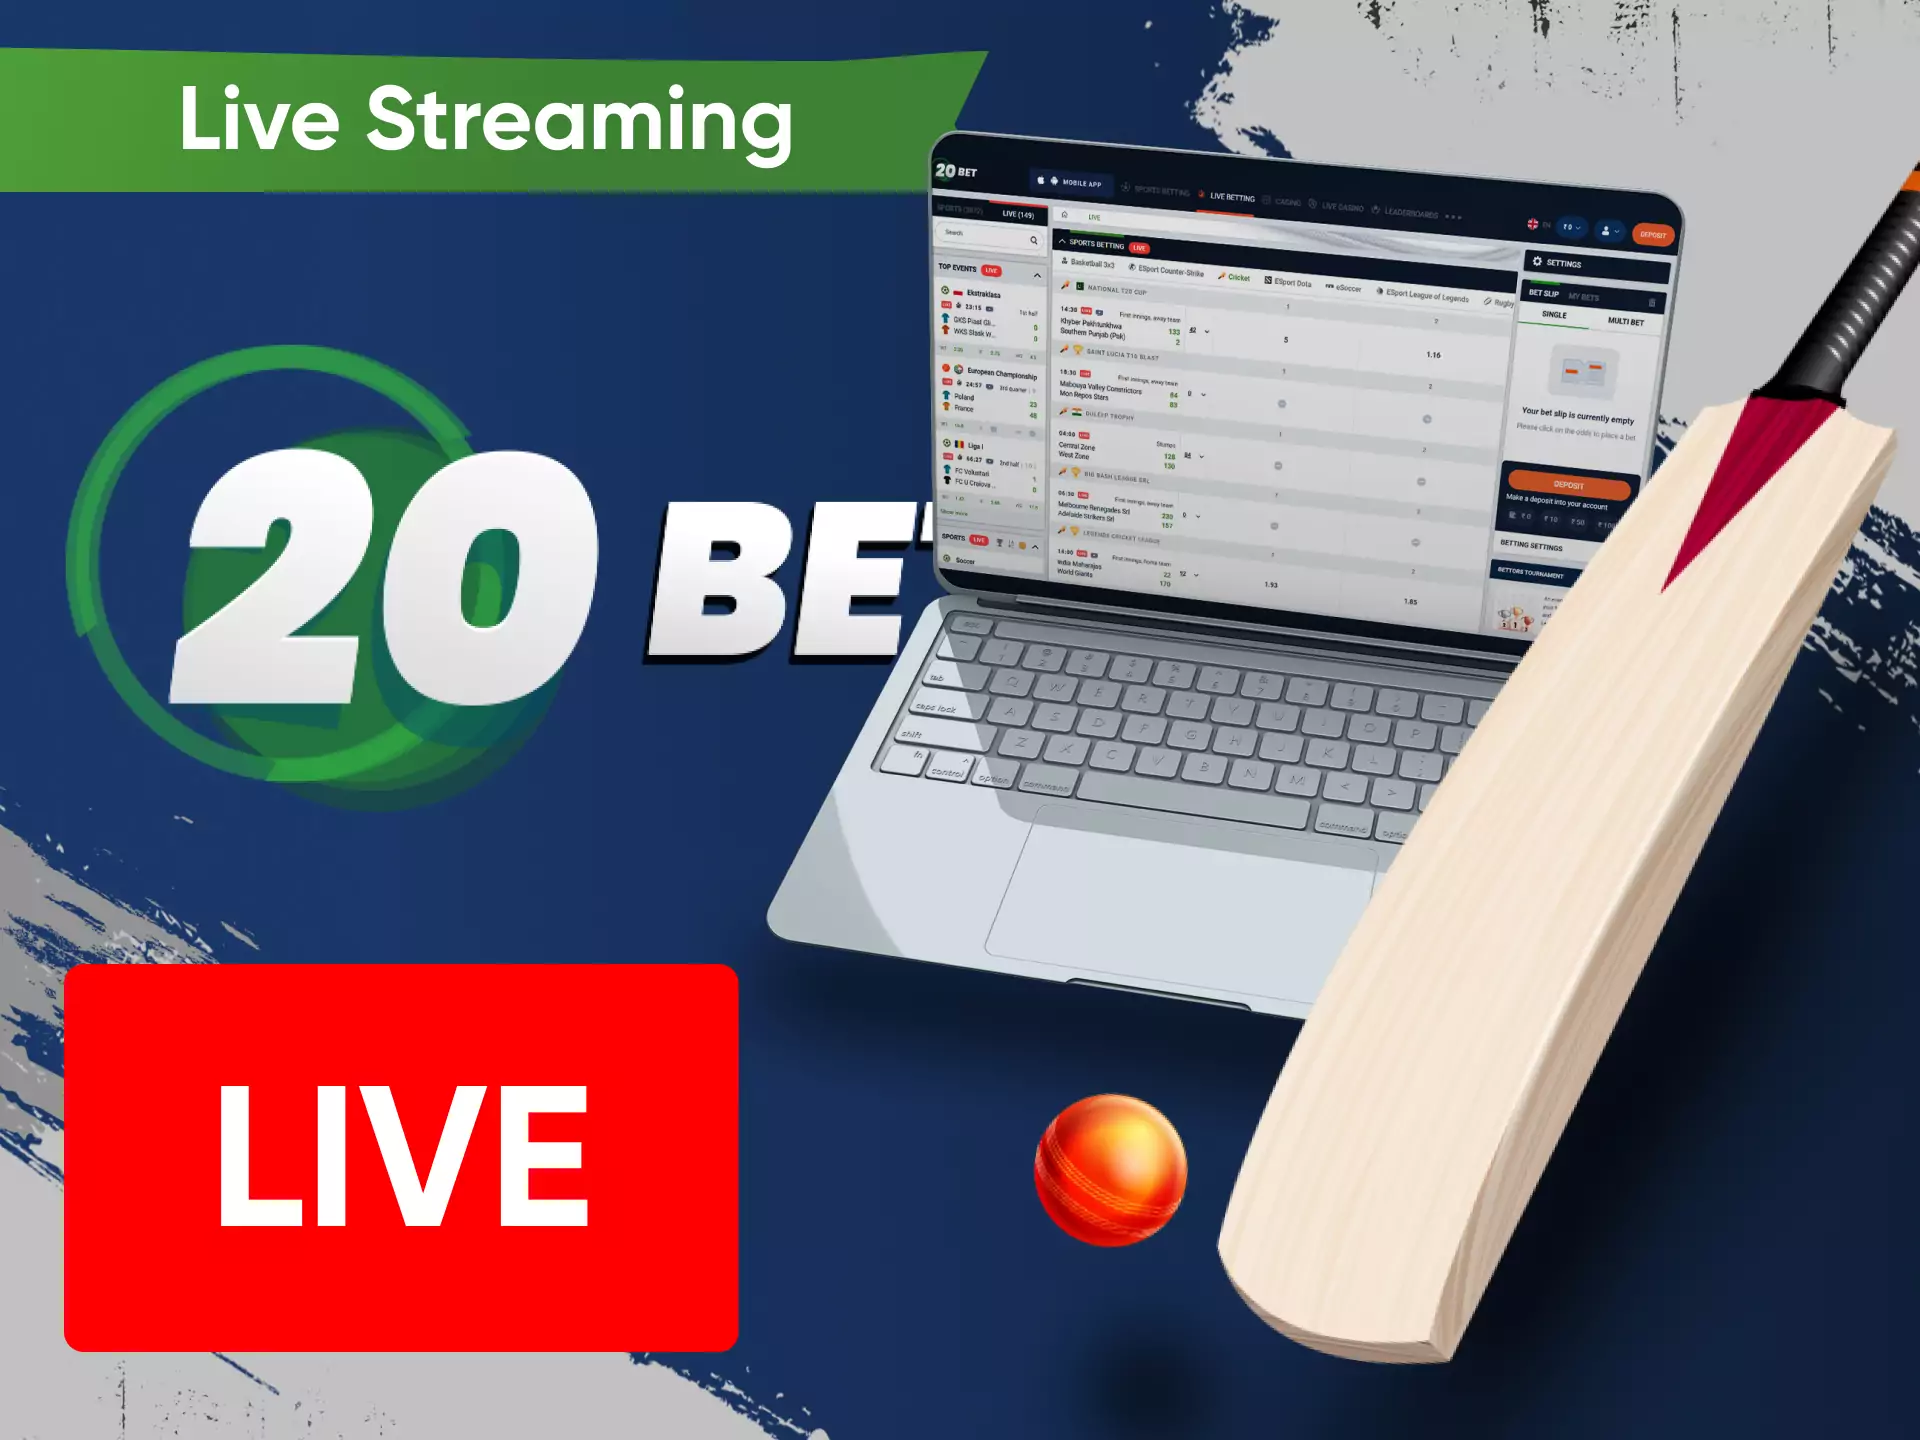 On 20bet, you can follow live events.